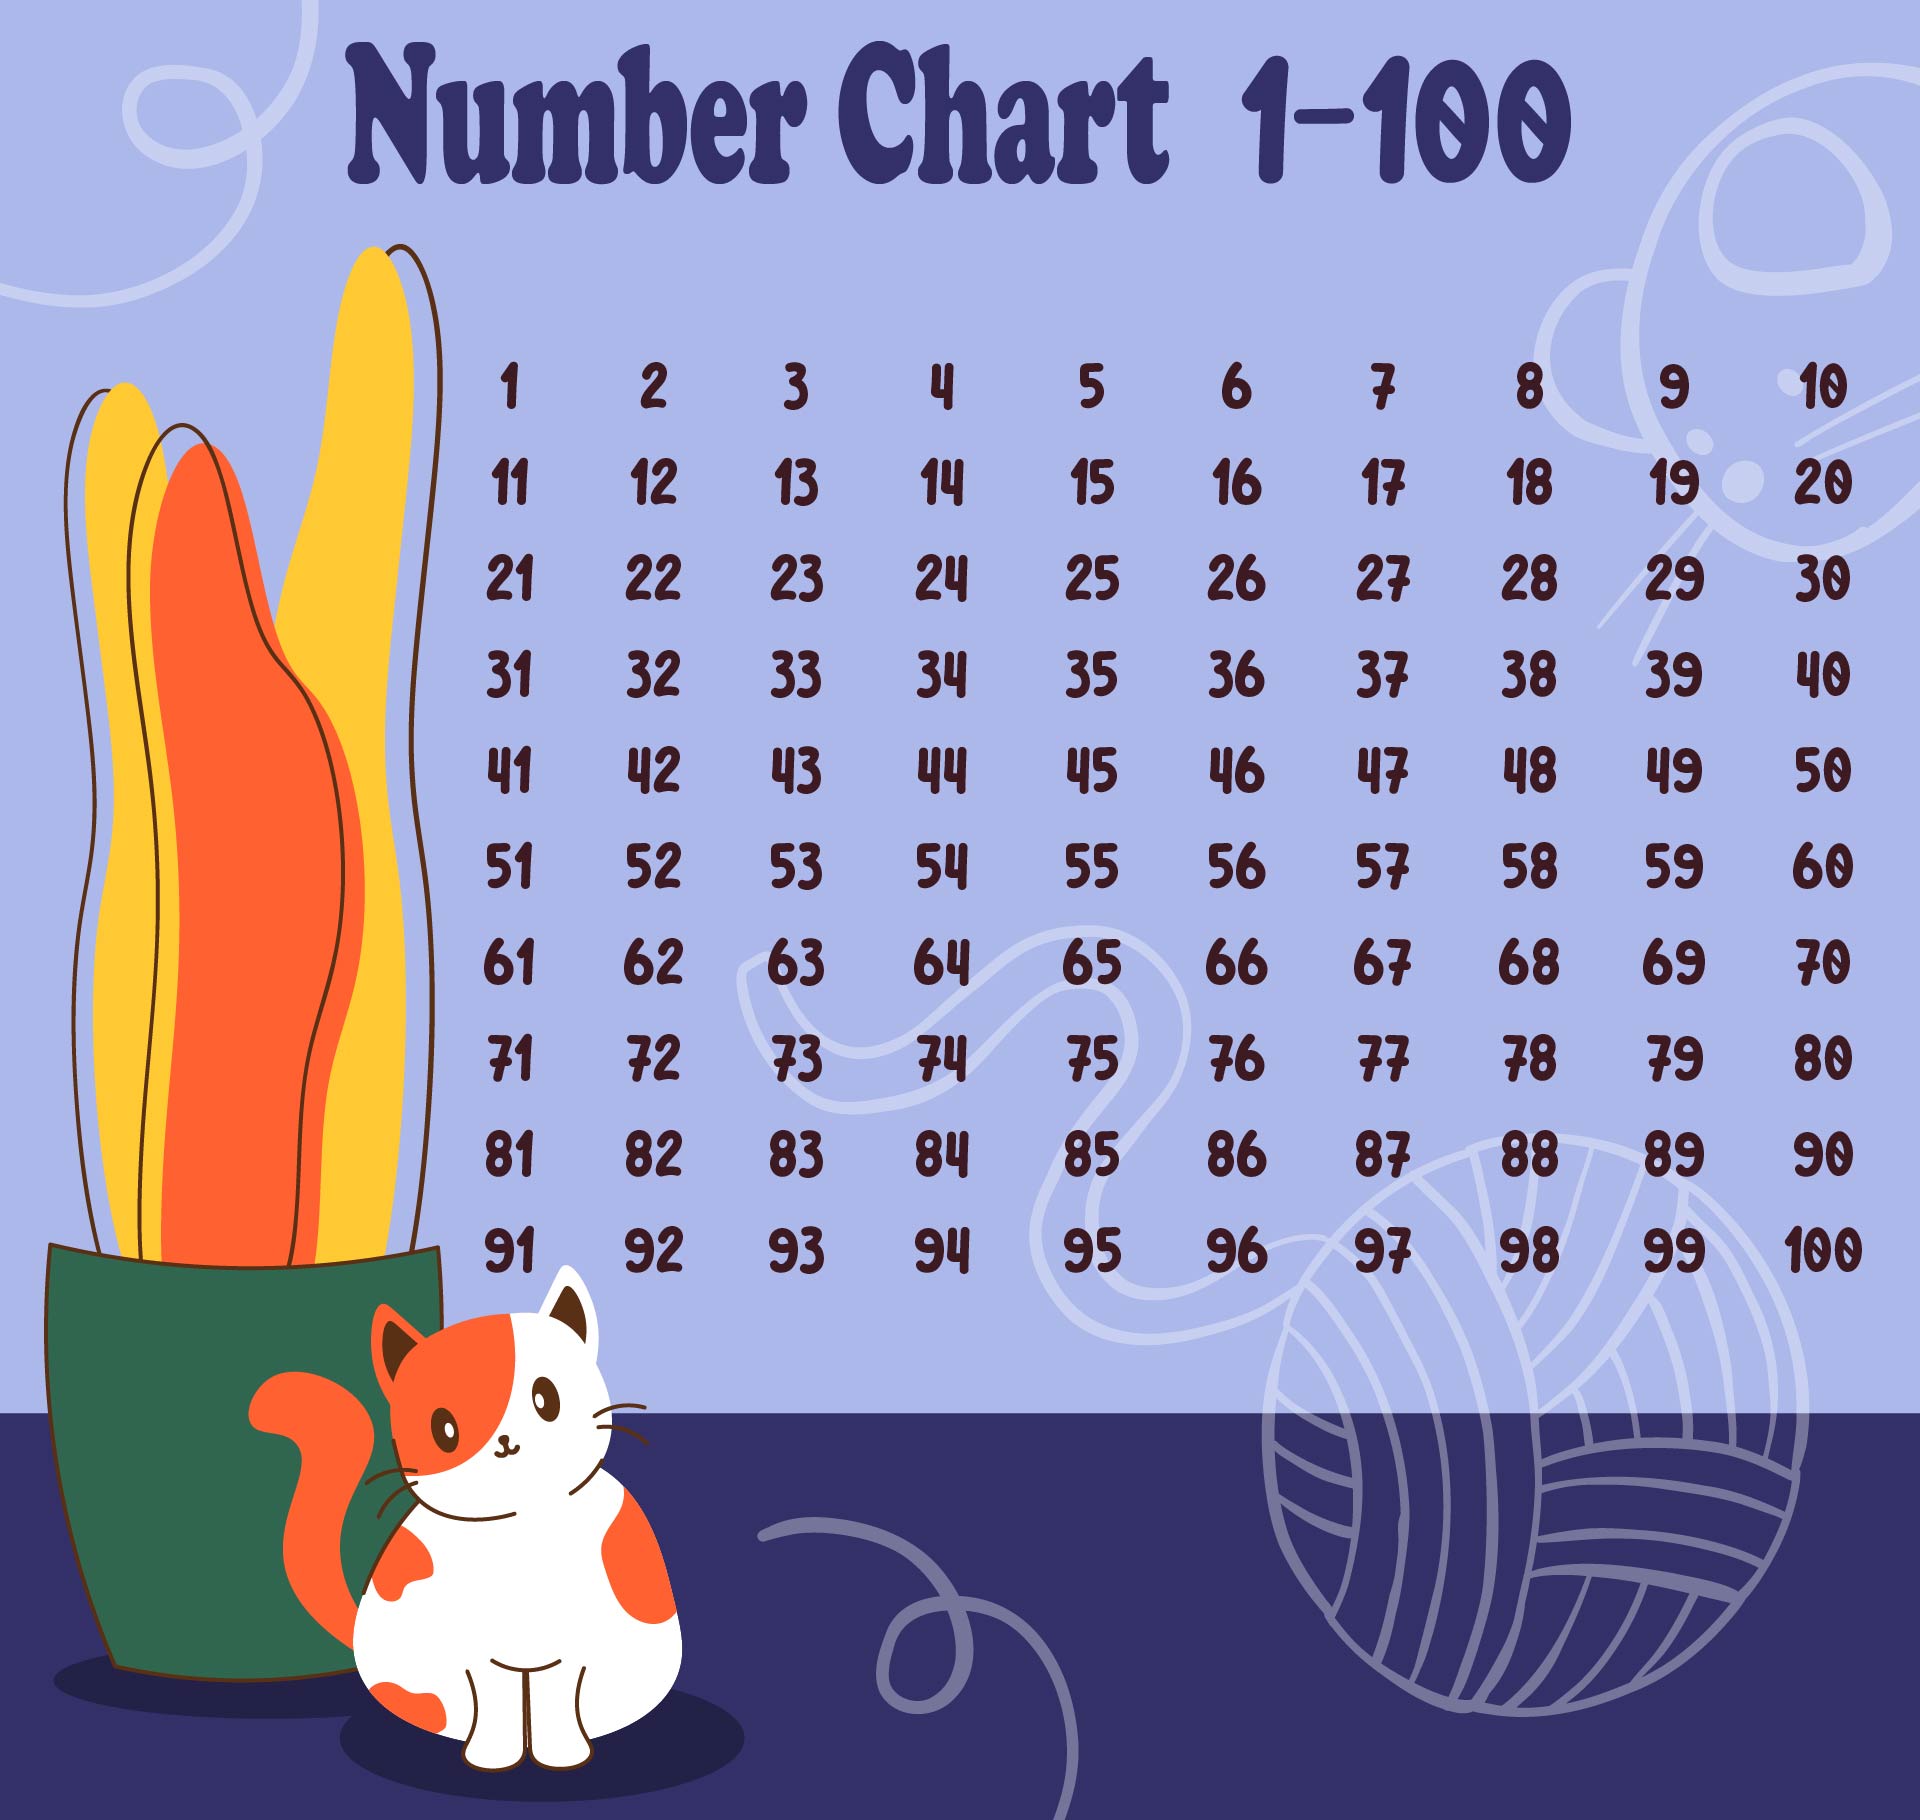 6-best-images-of-1-100-chart-printable-printable-number-chart-1-100-large-printable-numbers